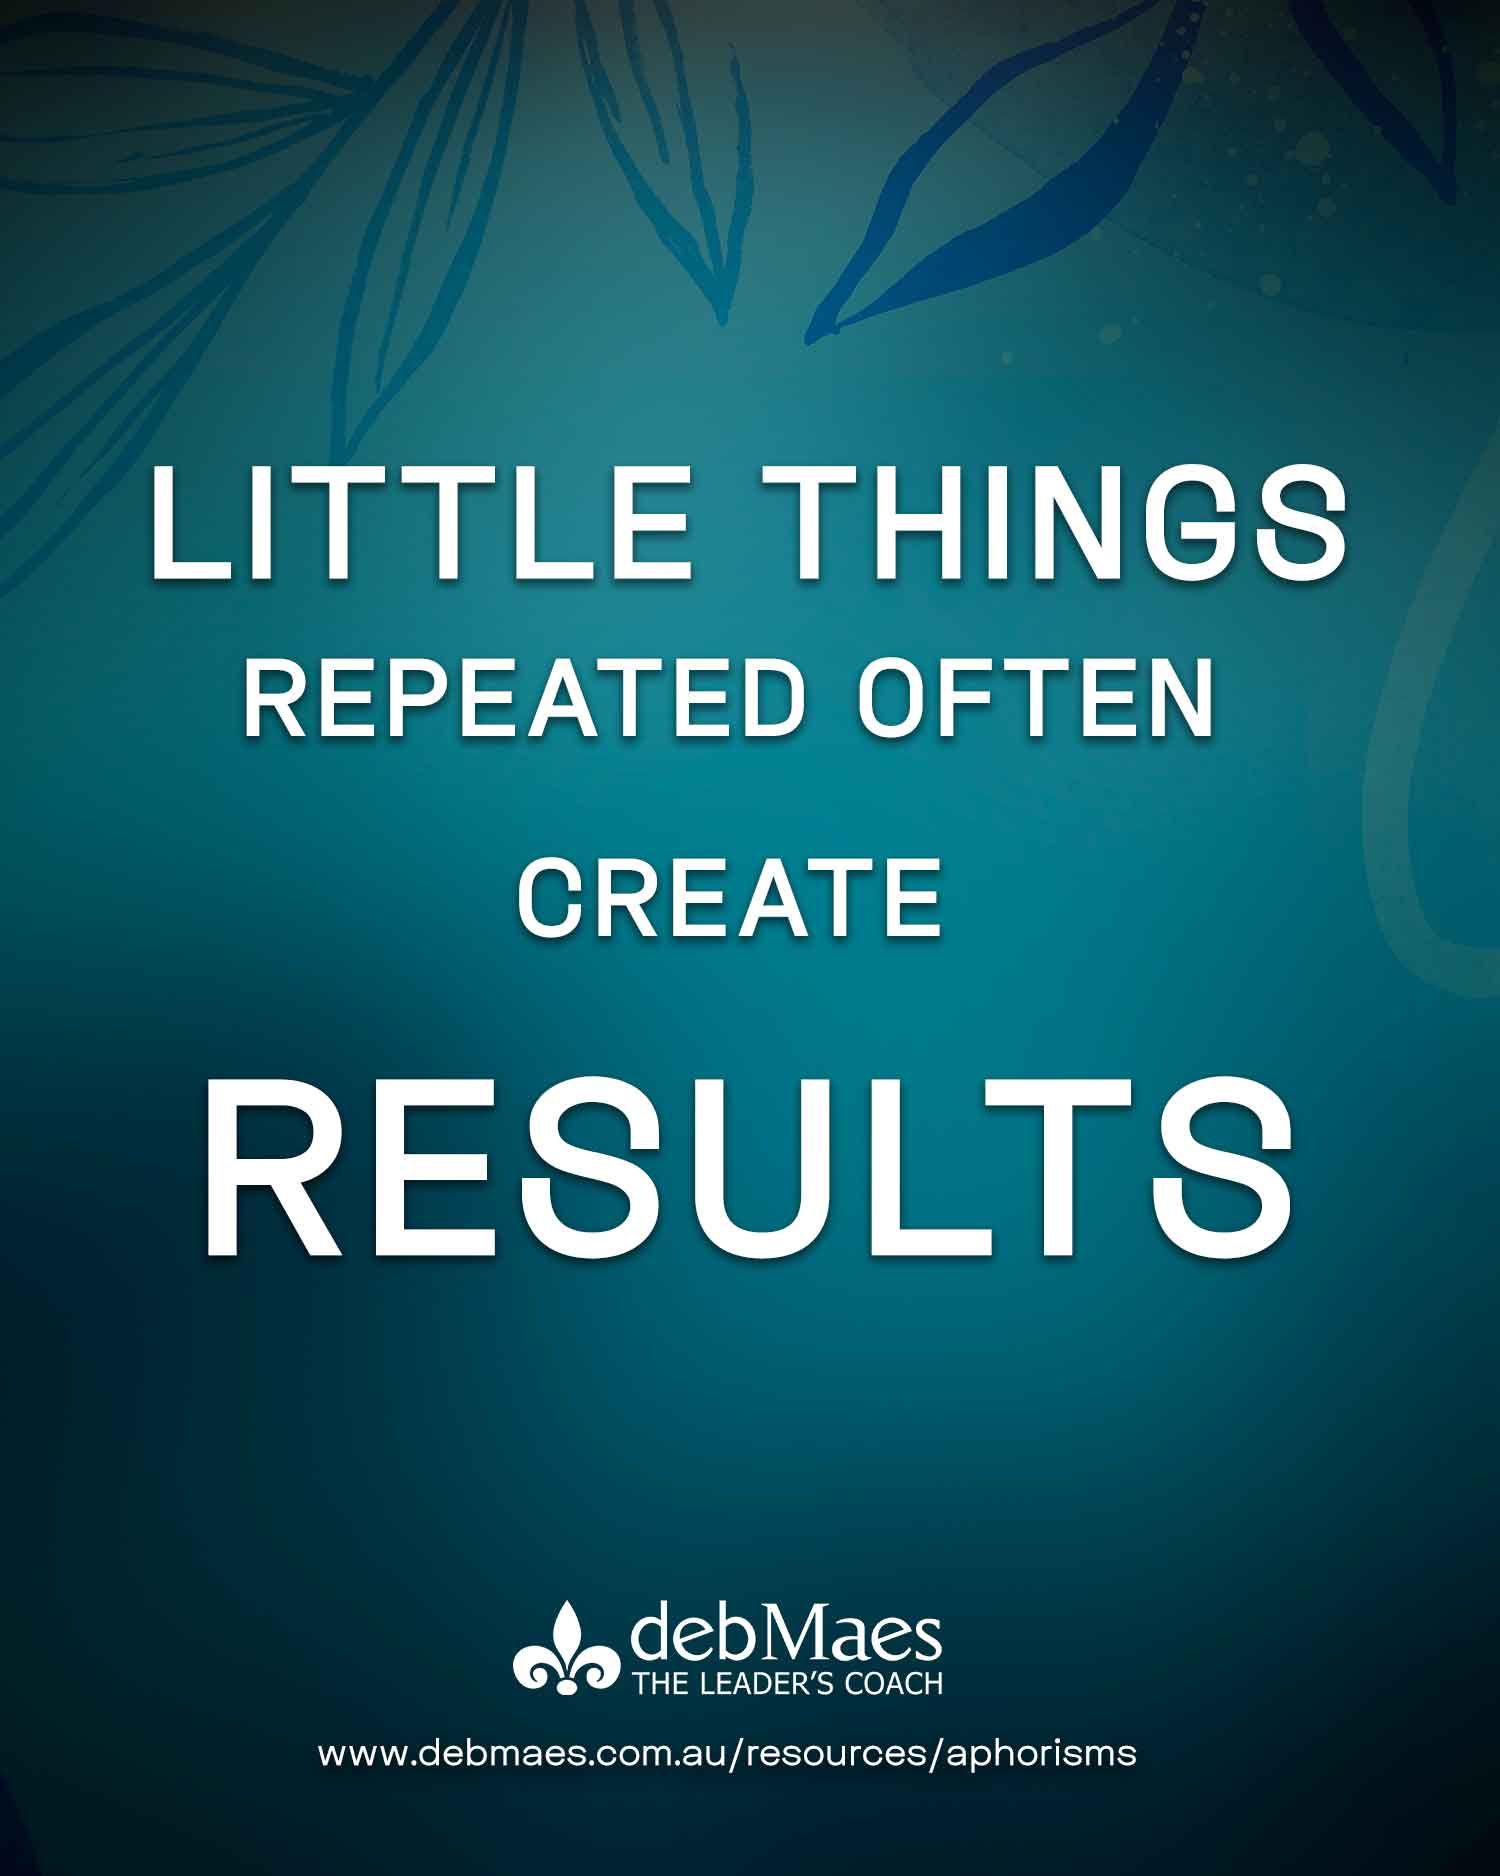 Little things repeated often create results